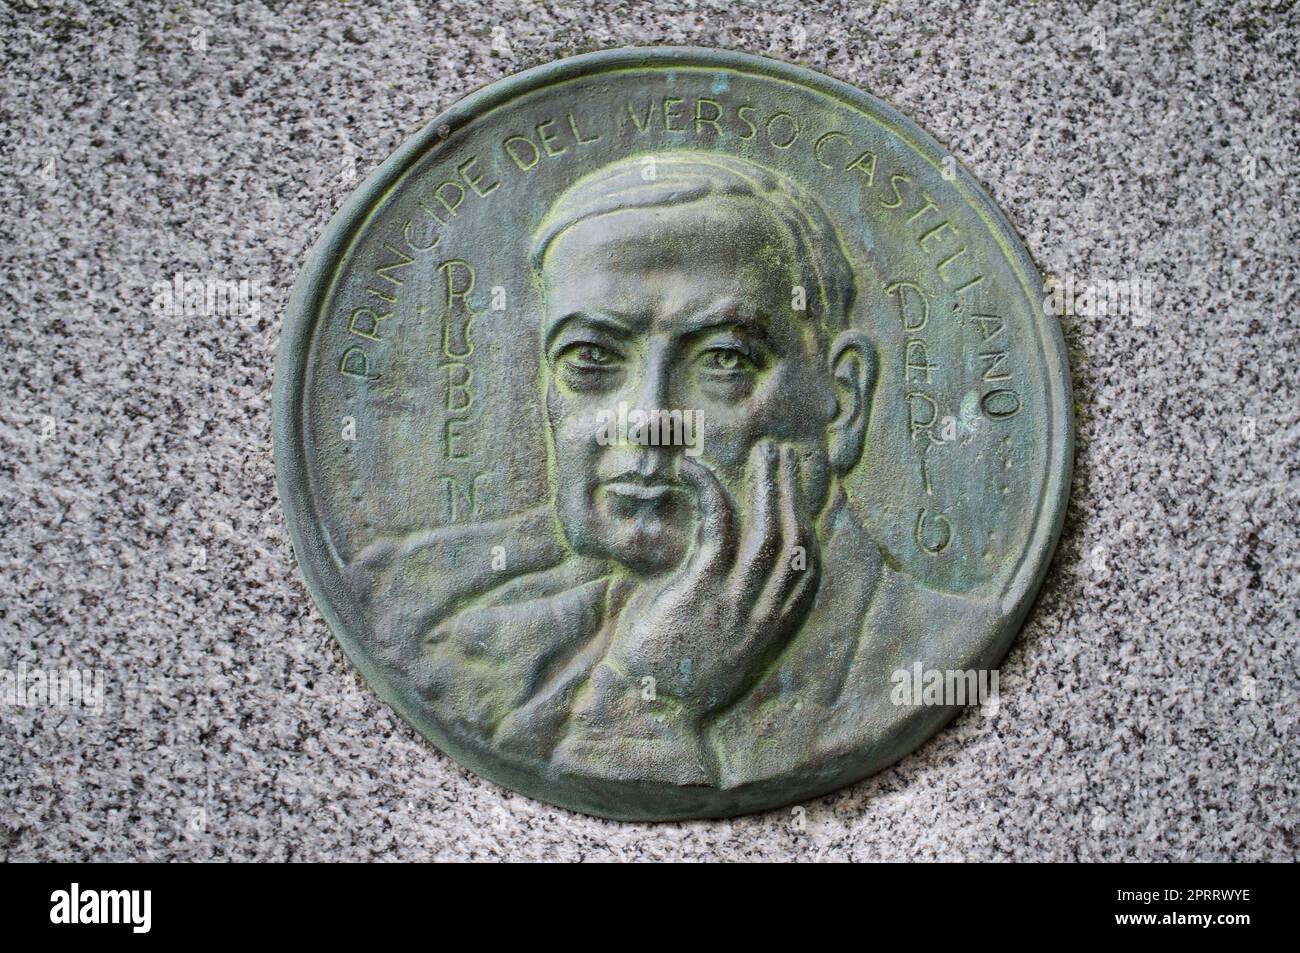 Caceres, Spain - Nov 26th, 2019: Ruben Dario bronze medallion at San Jorge Square, Caceres, Spain.  Nicaraguan poet who initiated the modernismo Stock Photo